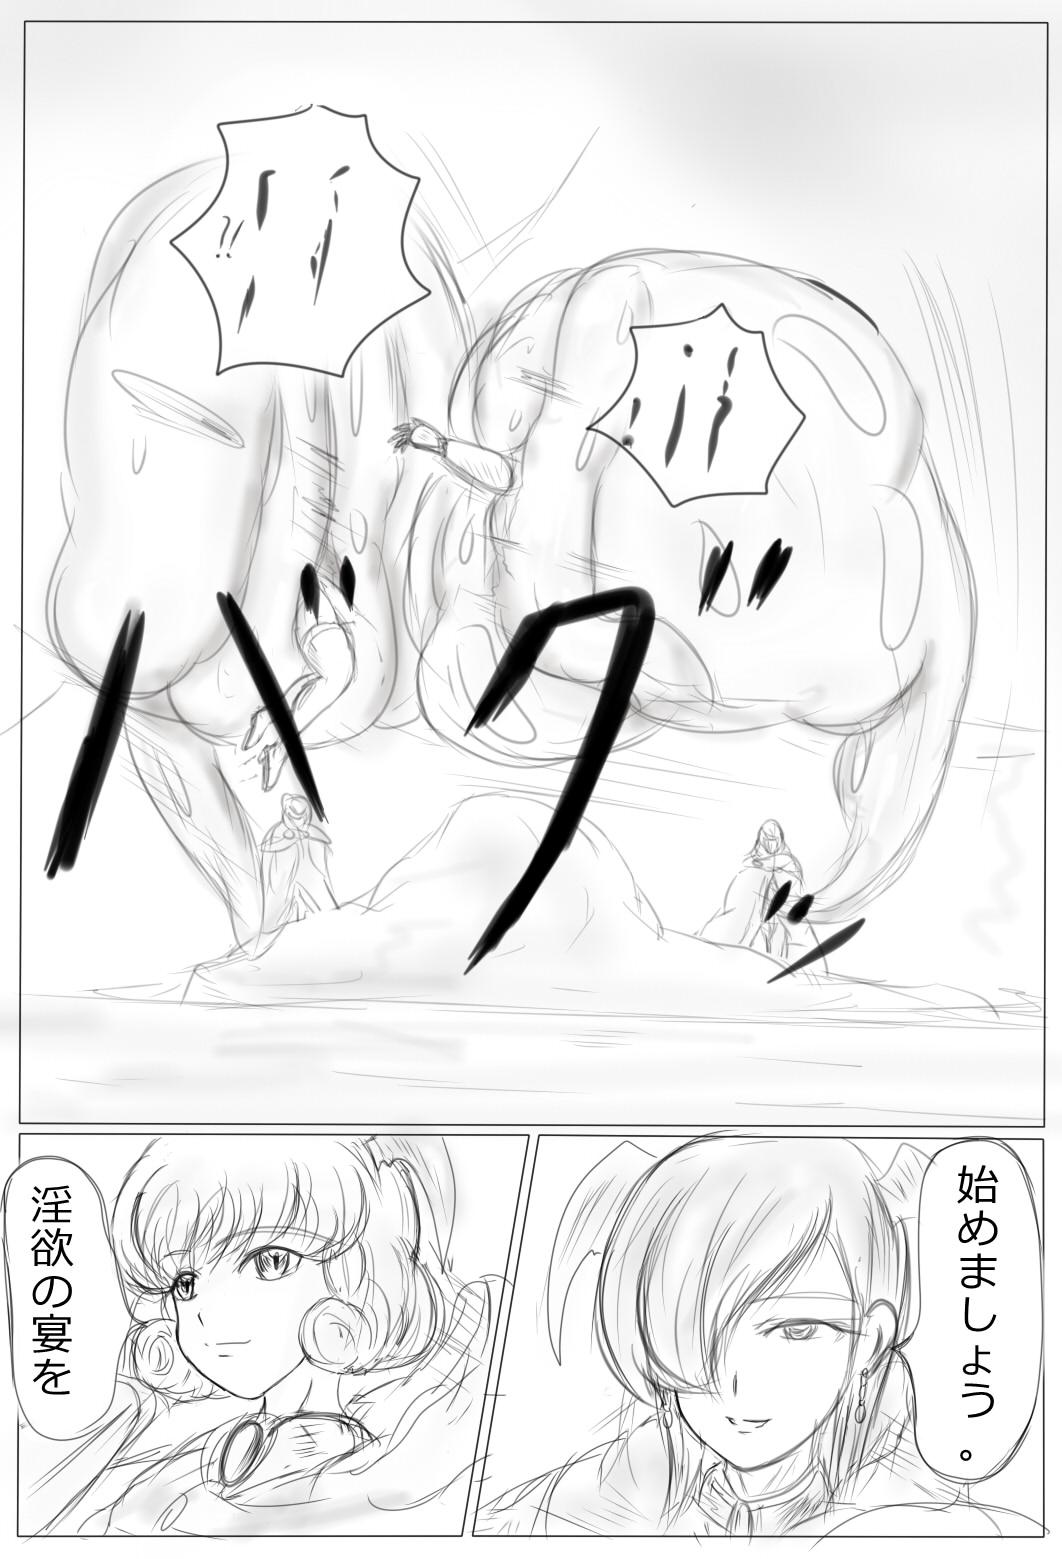 Horny Slut [がんすきー] Claire to Rin ~Inma no Nie~ Ch. 1-2 Fetiche - Page 4